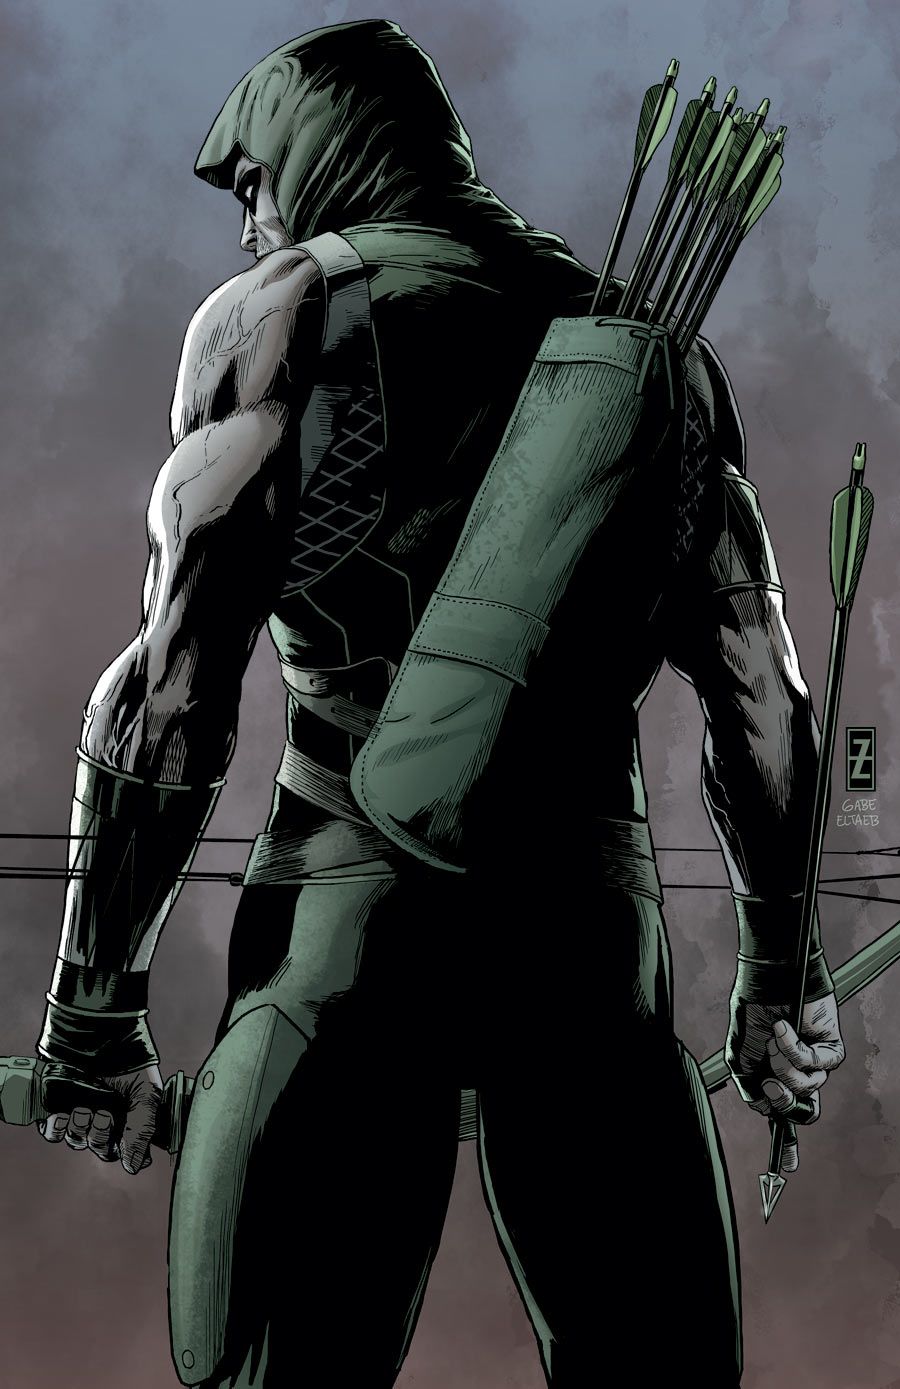 Phone Wallpaper For DC Marvel Characters. Green Arrow Comics, Arrow Comic, Green Arrow